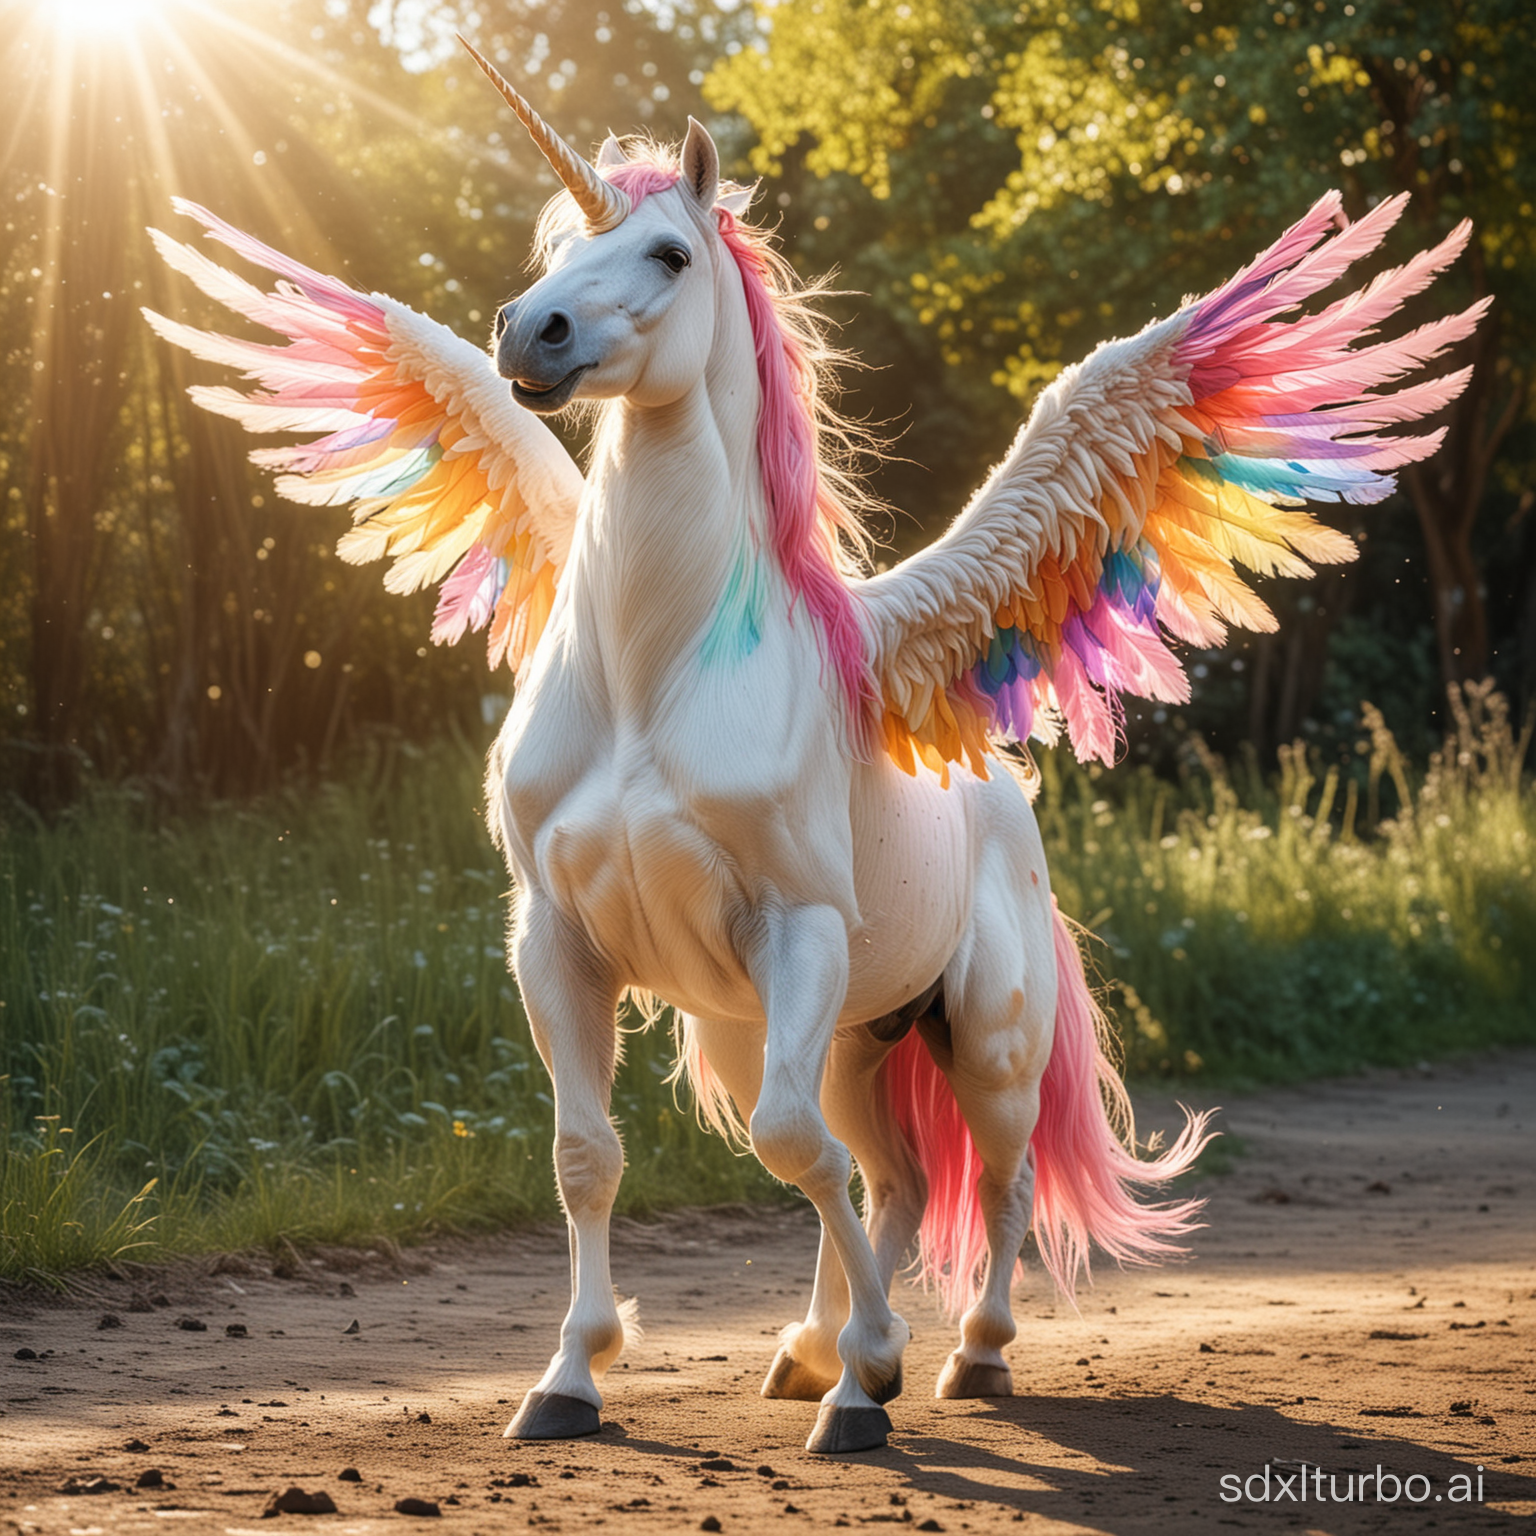 Unicorn with rainbow colors fur and tale in the open air with wings spread out in the bright sun